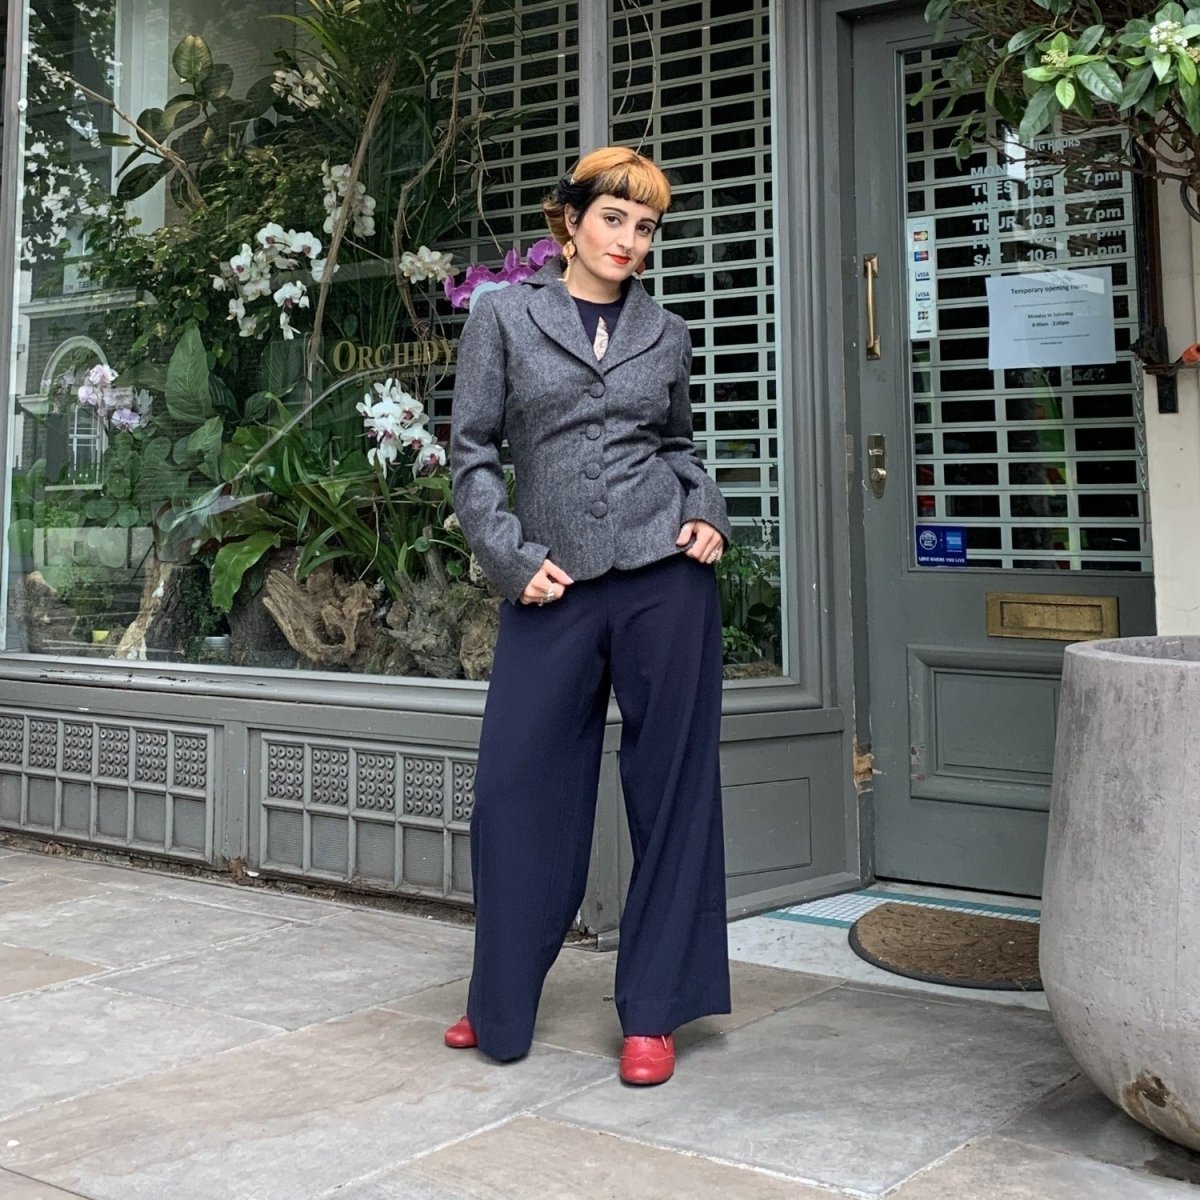 Pure wool jacket in a stone colour worn over a navy jumpsuit by Sara who stands in front of a florist shop.